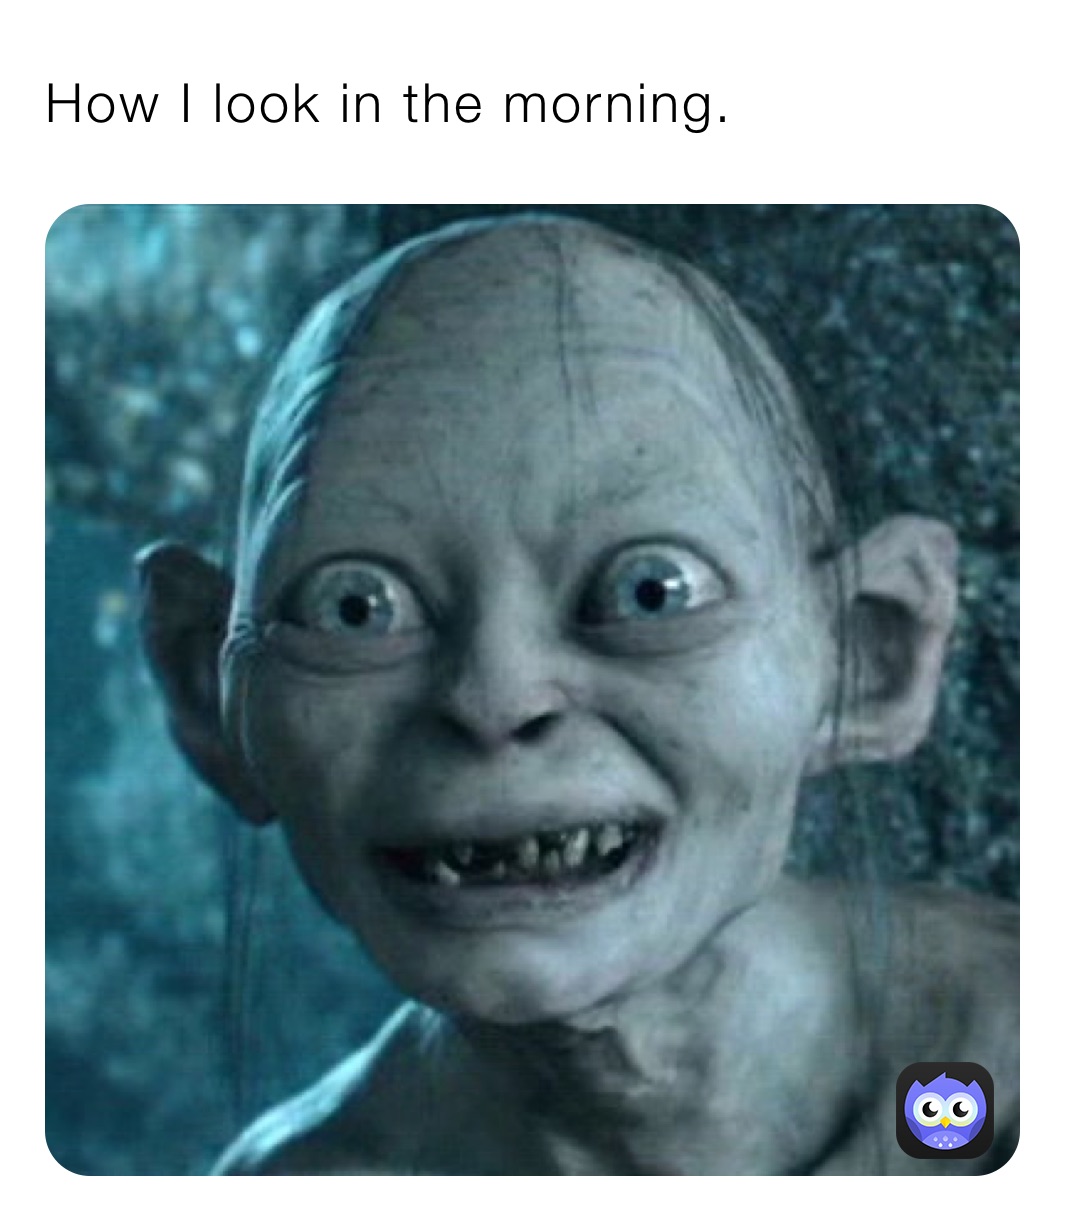 How I look in the morning.